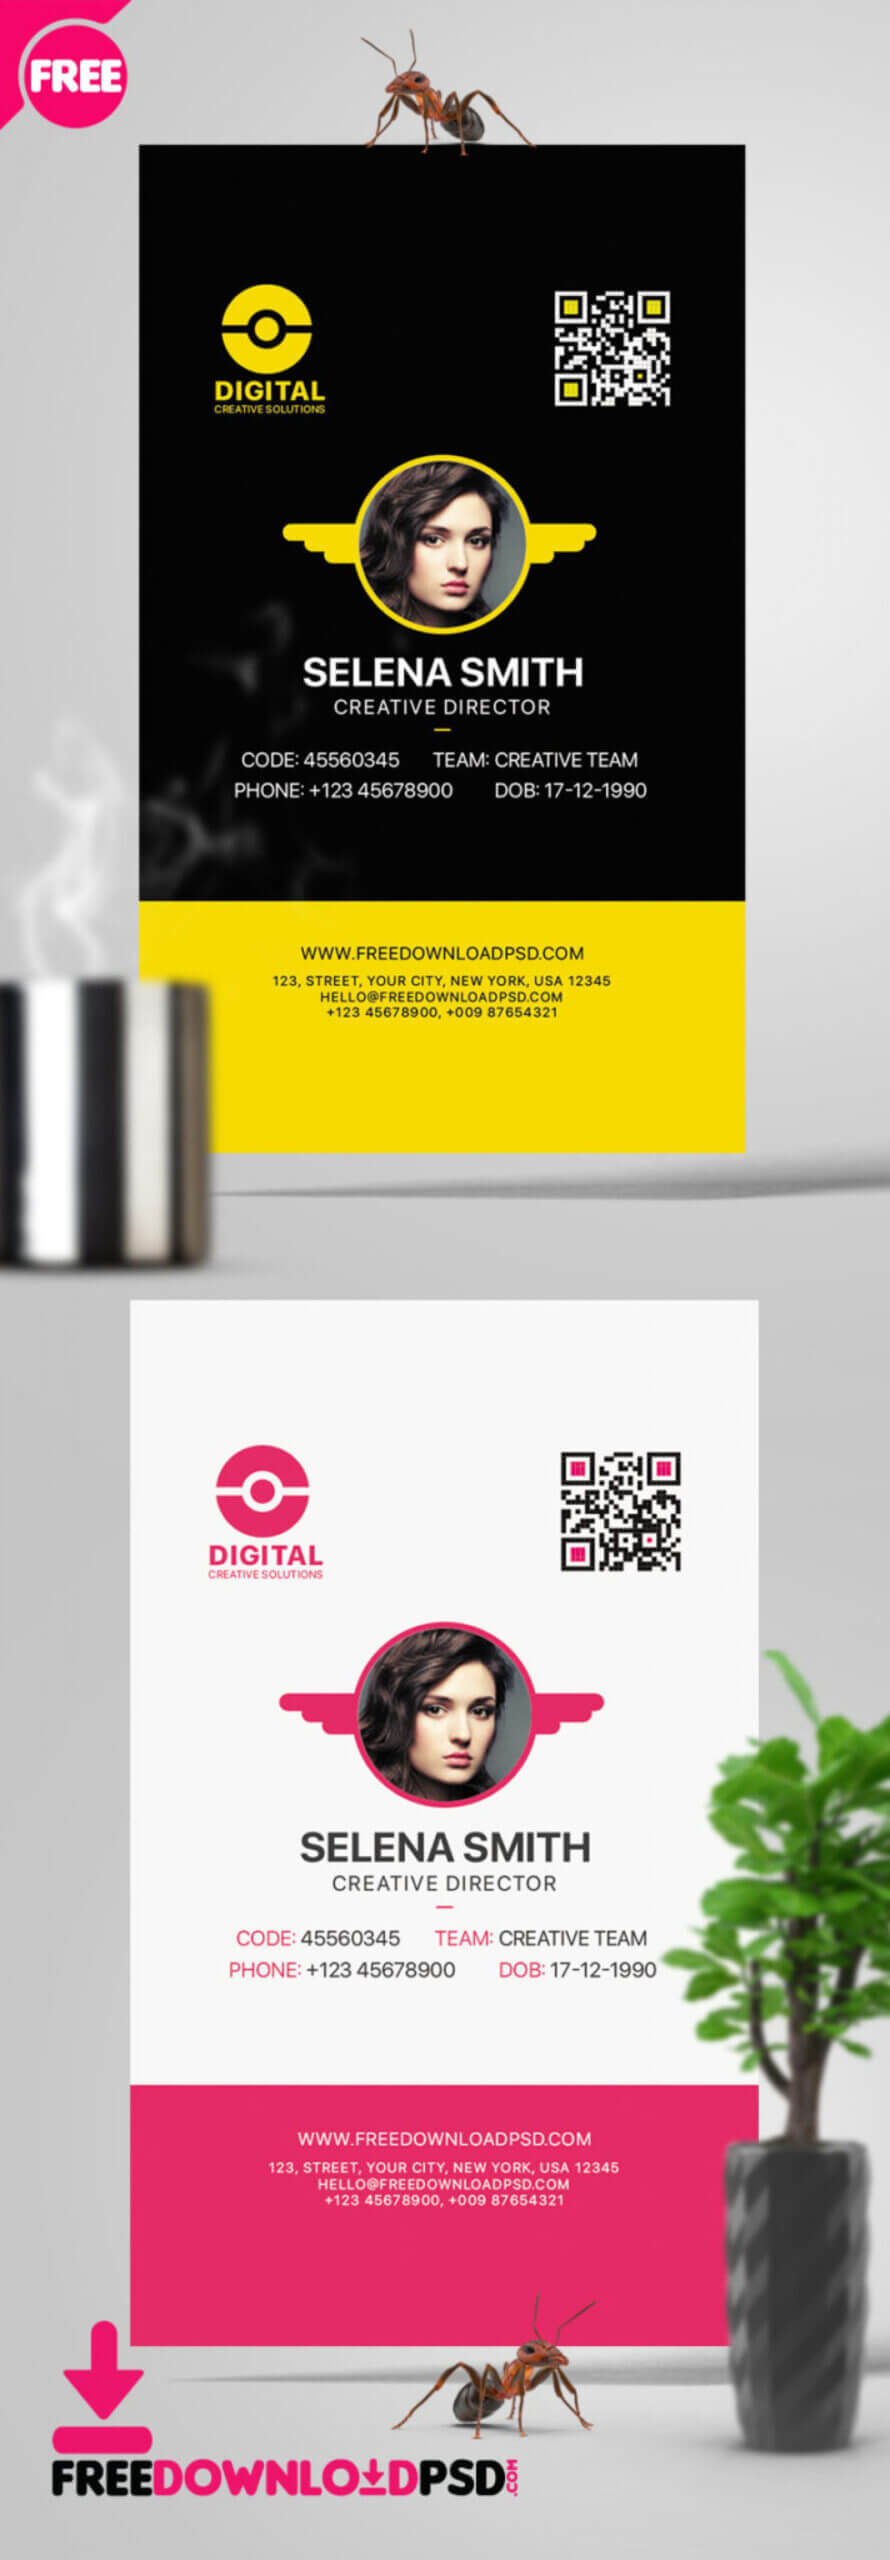 006 Template Ideas Employee Id Card Free Download Psd For Personal Identification Card Template